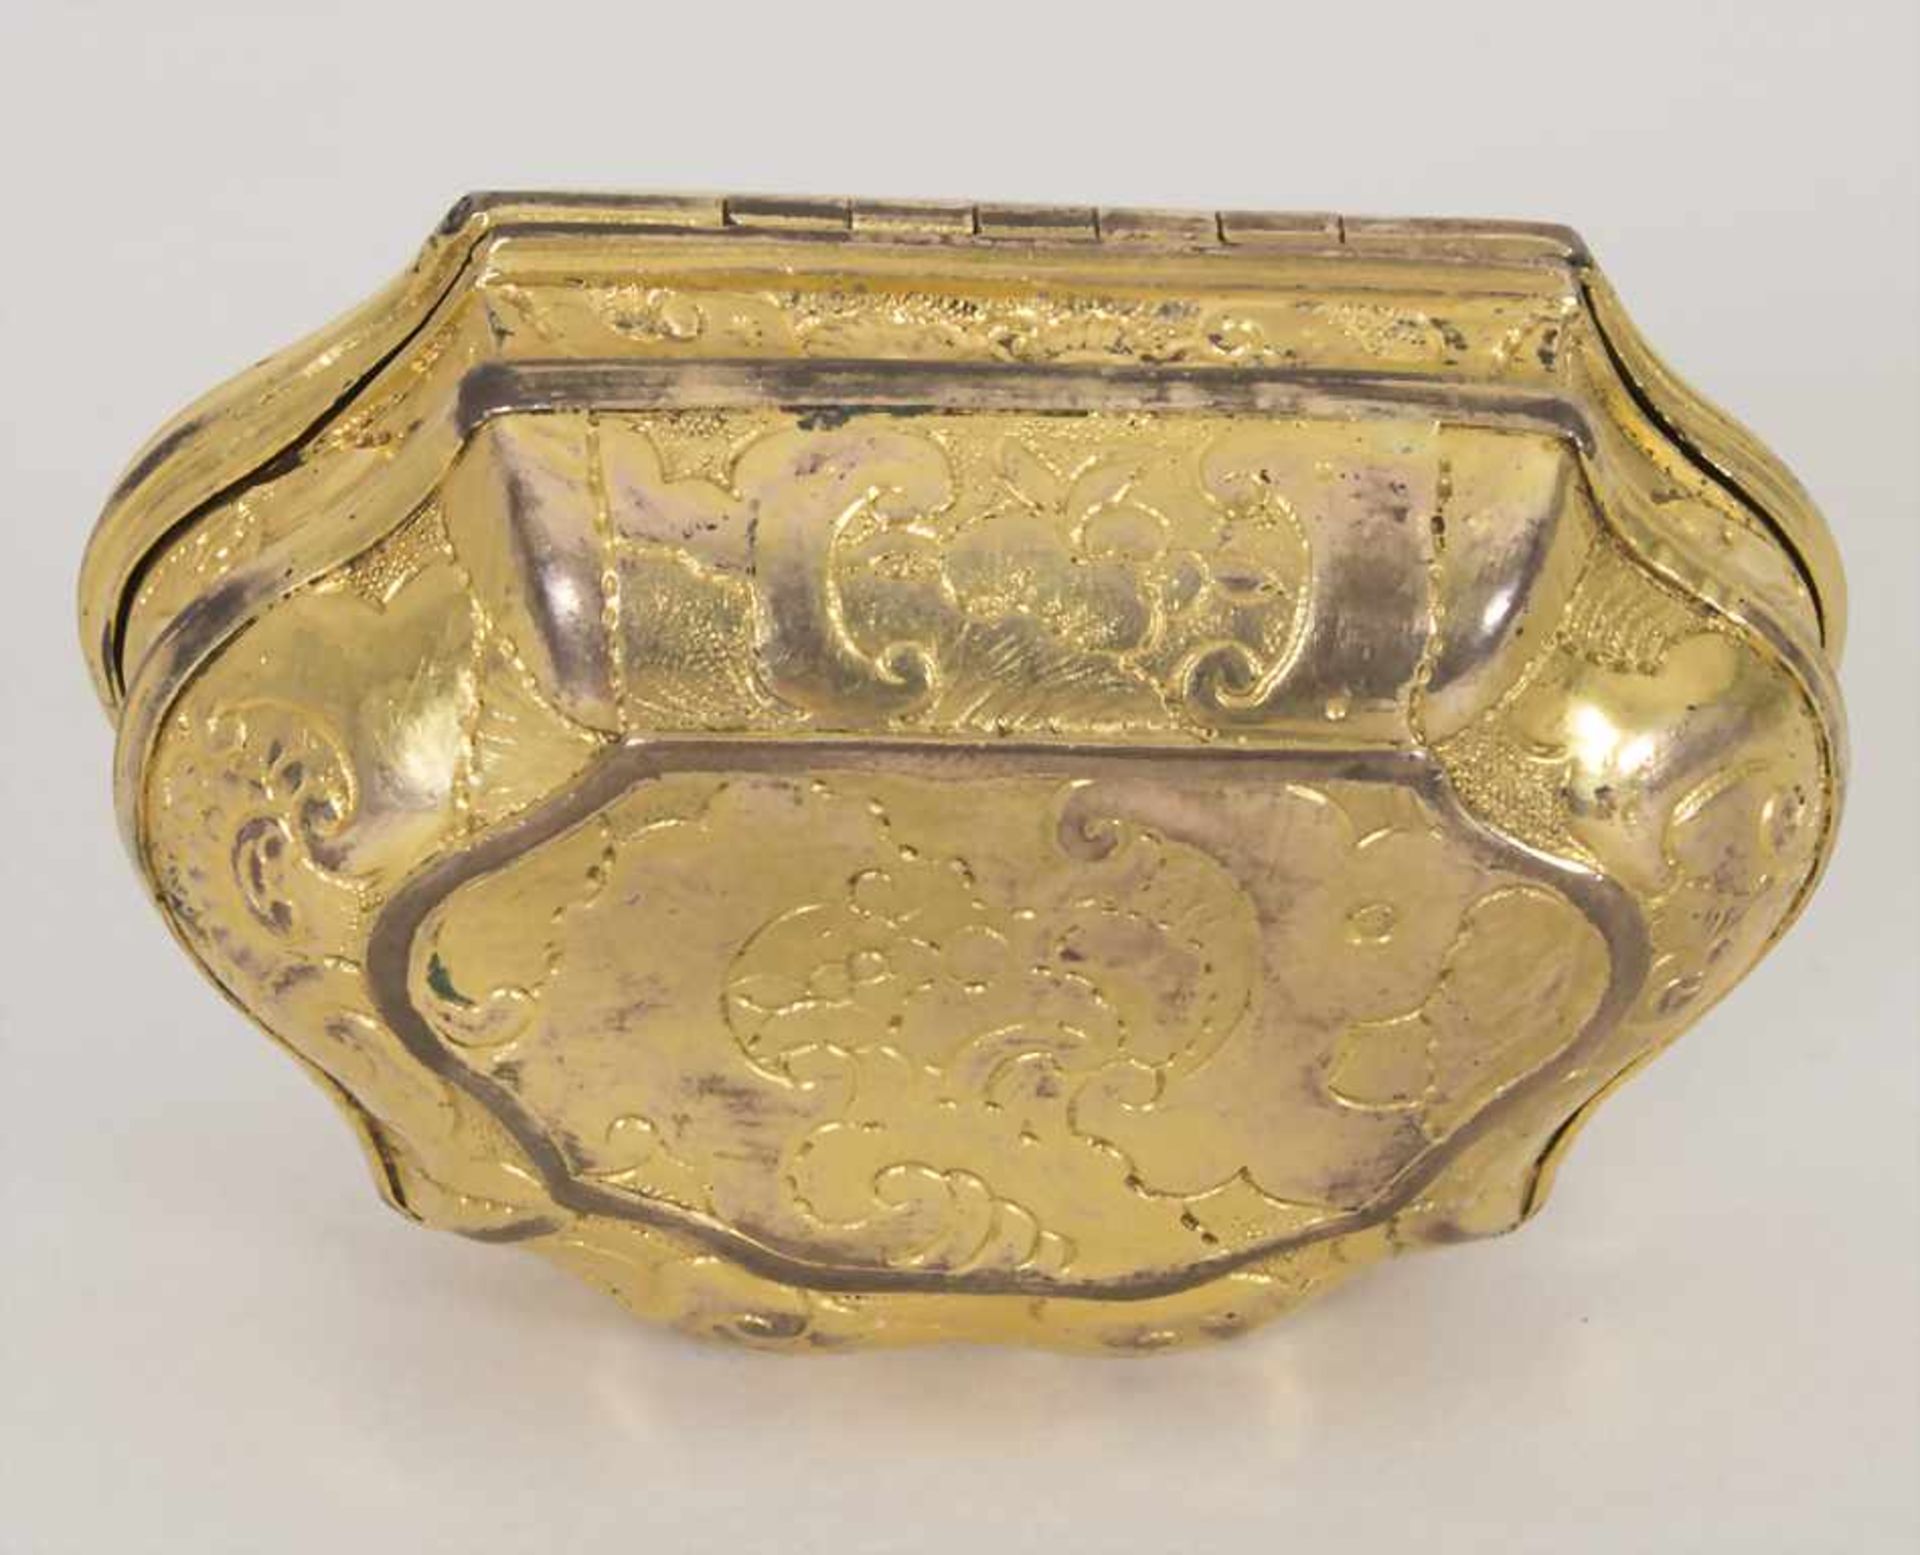 Schnupftabak-Dose / Tabatiere / A silver snuffbox, wohl Augsburg, um 1700Material: Silber, 13 Lot, - Image 4 of 7